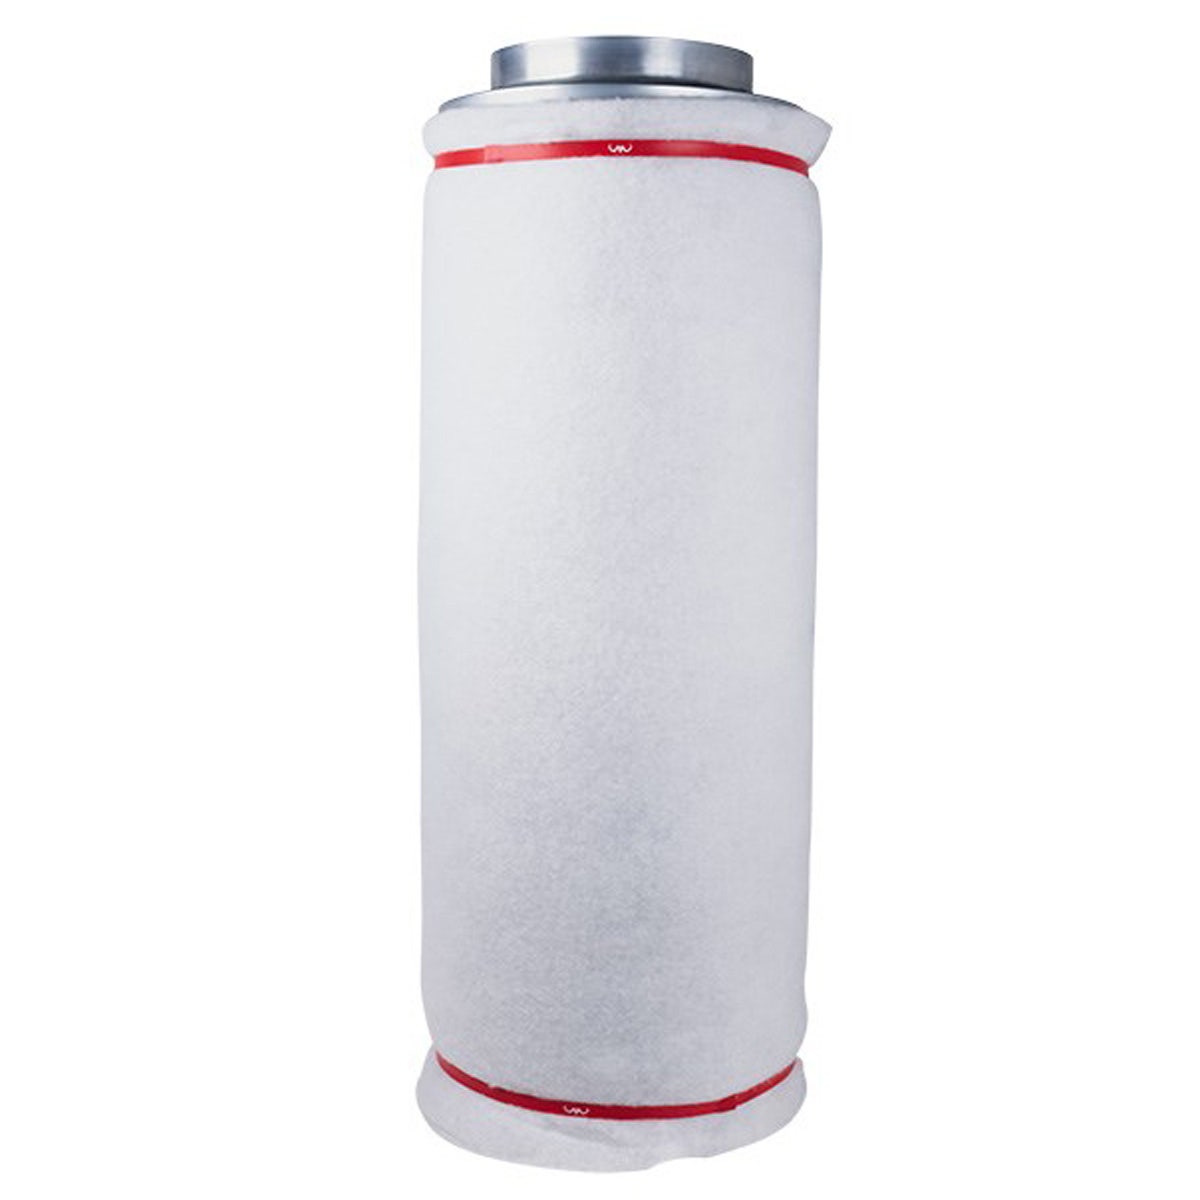 Mammoth Carbon Filter